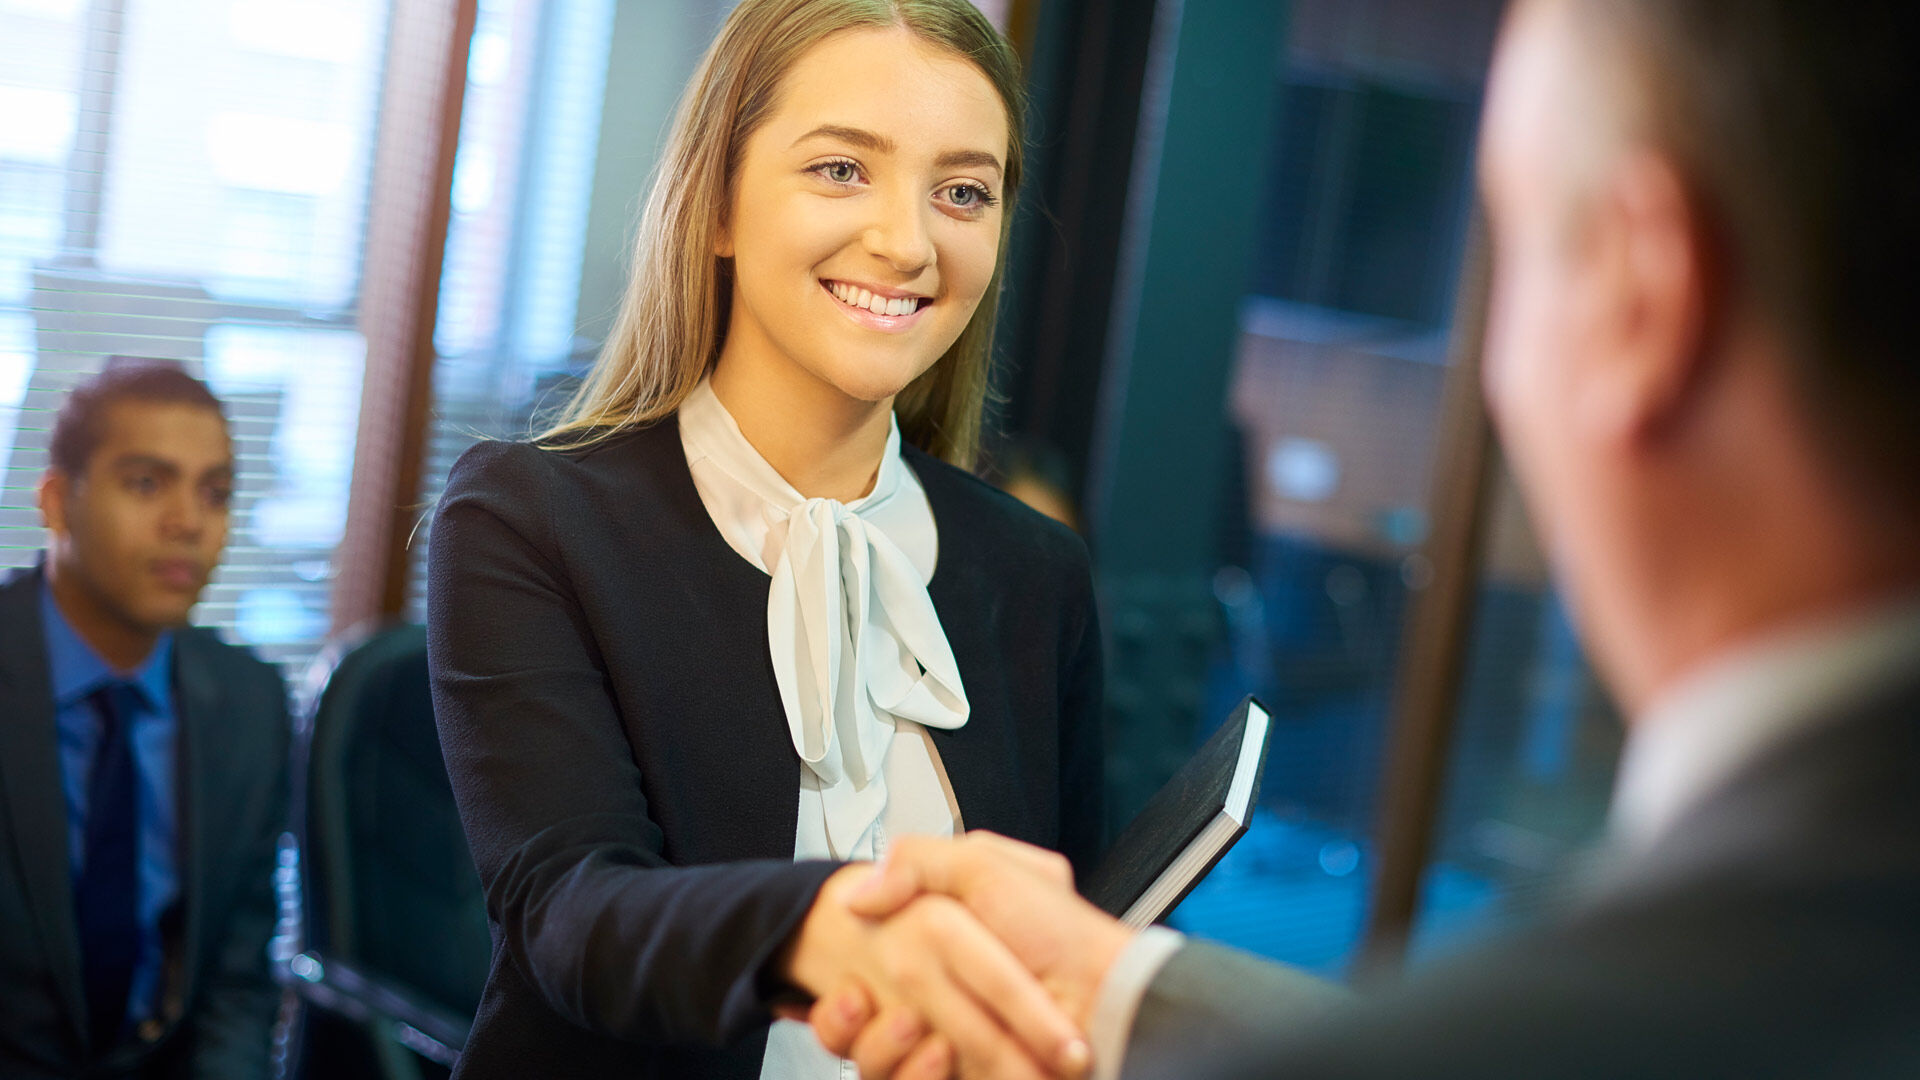 A woman in business attire shaking hands with a person, signaling a professional greeting or agreement in an office setting.